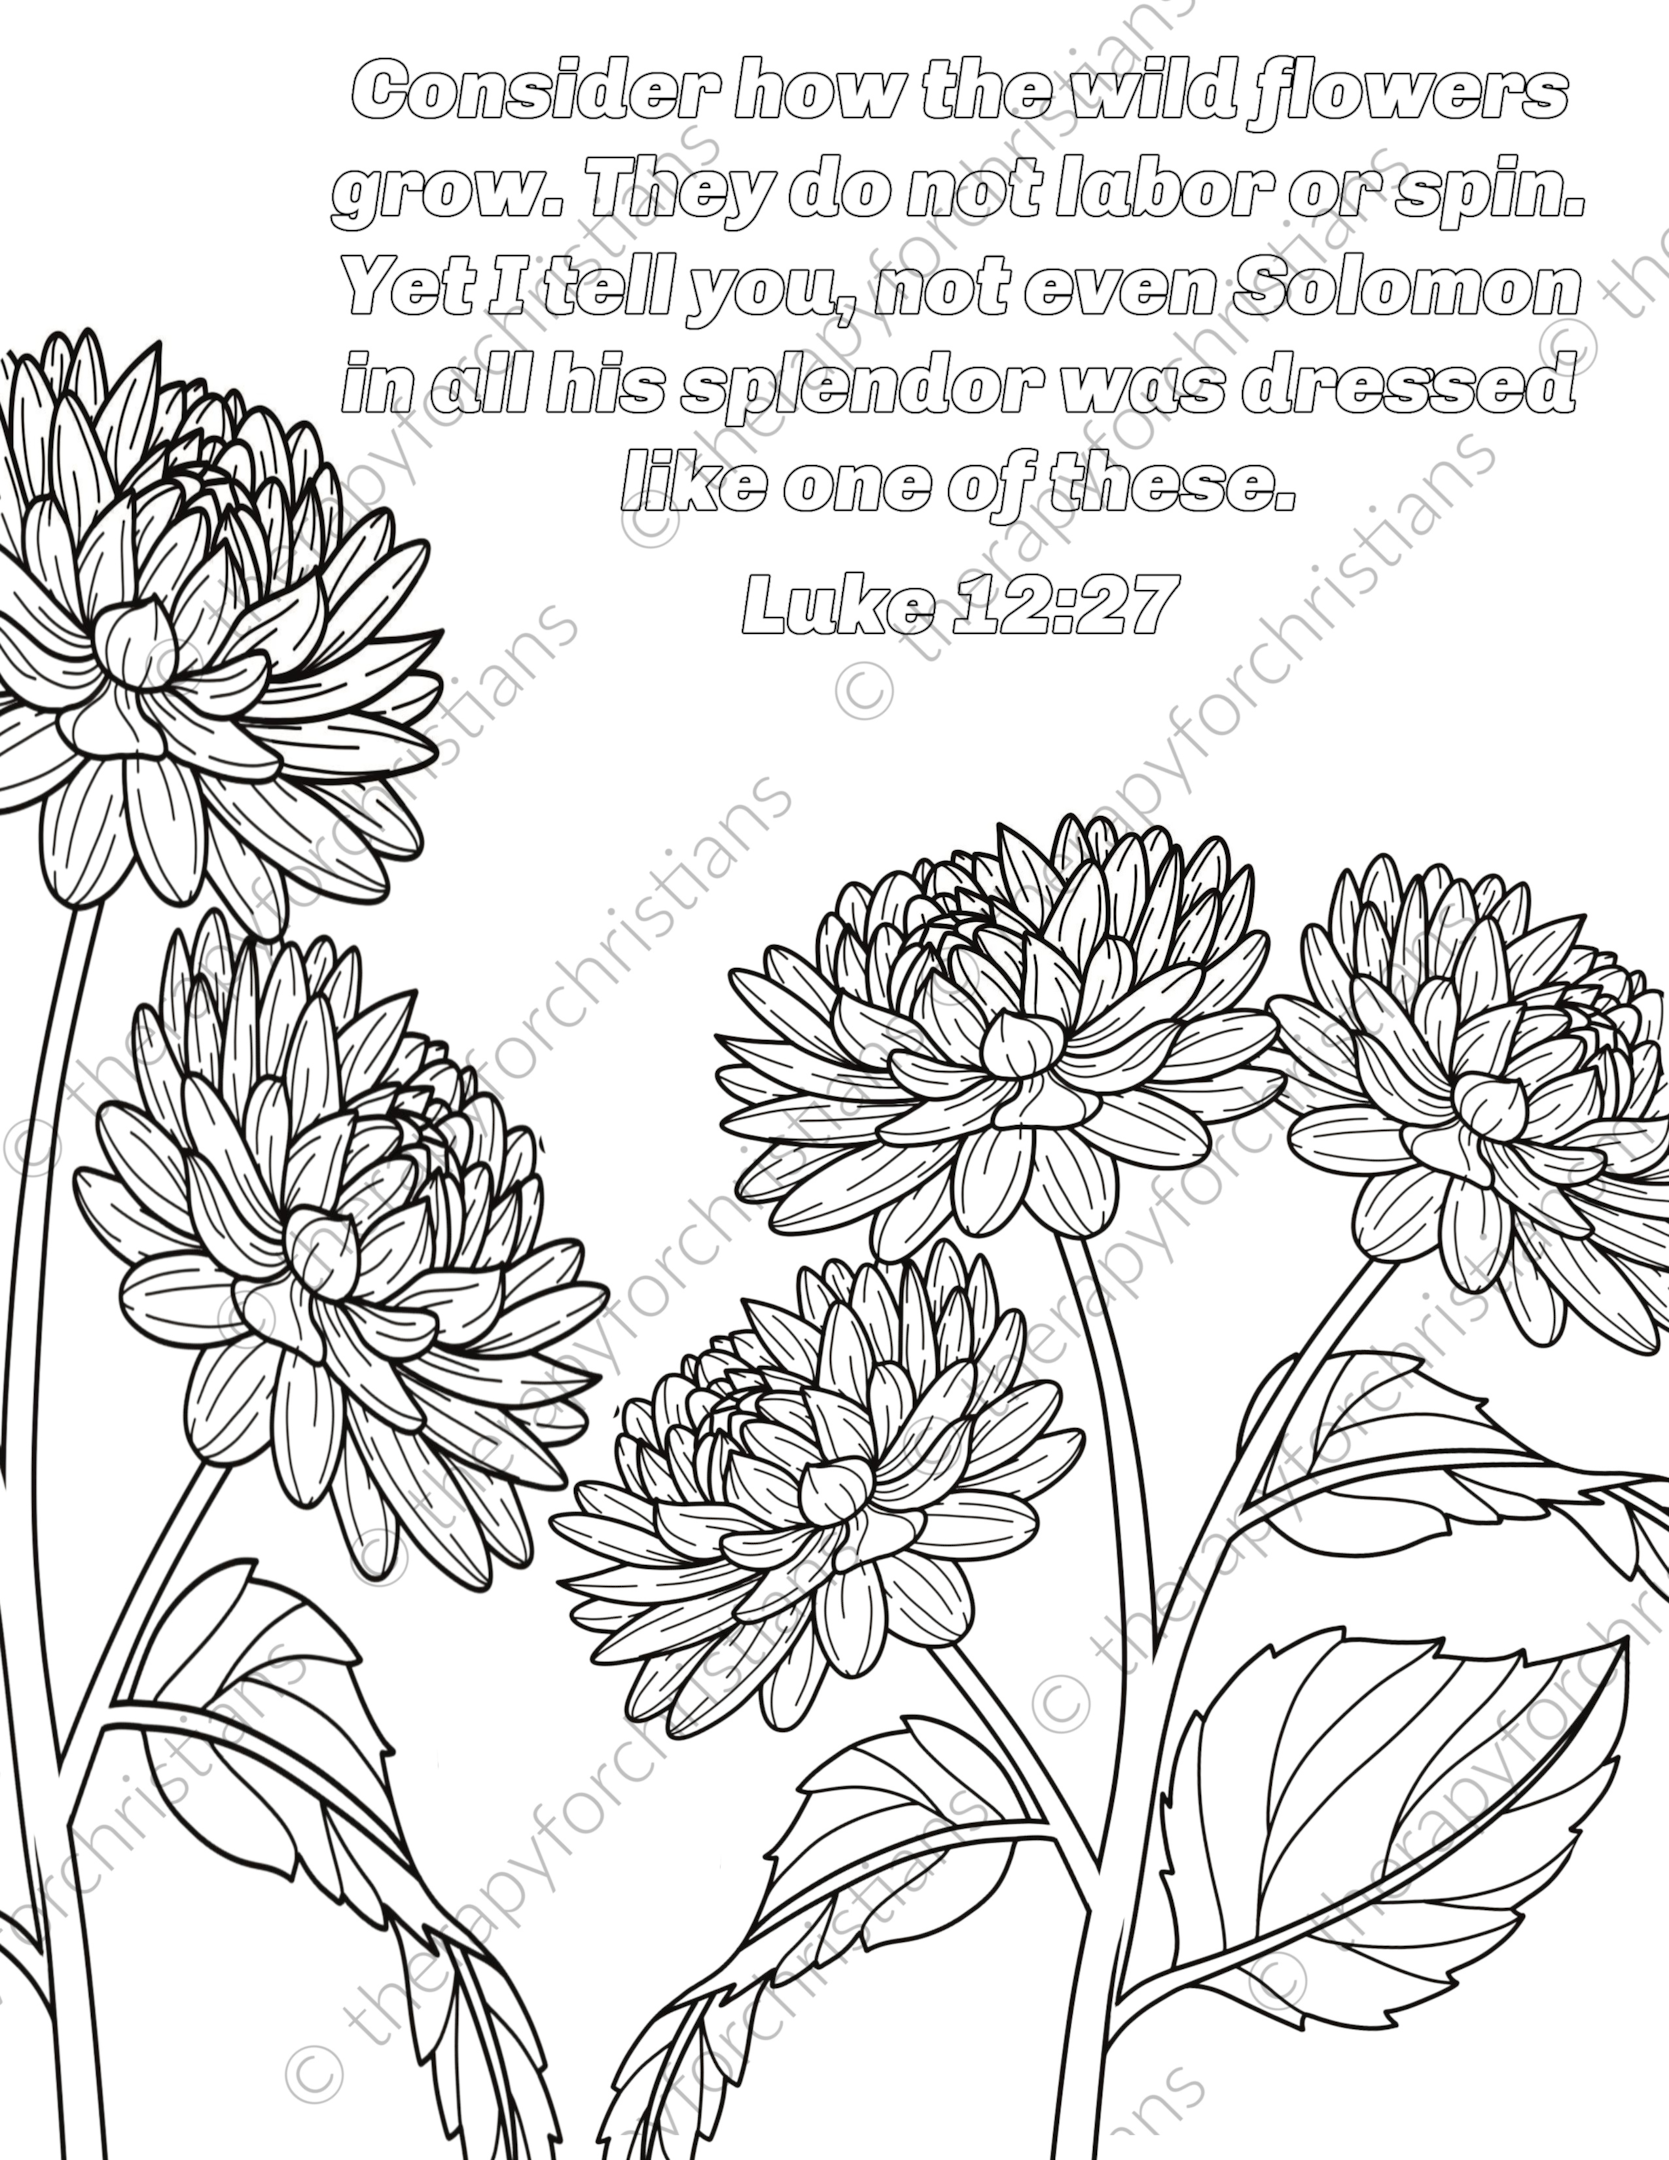 Printable Bible verse coloring pages based on Luke 12:27